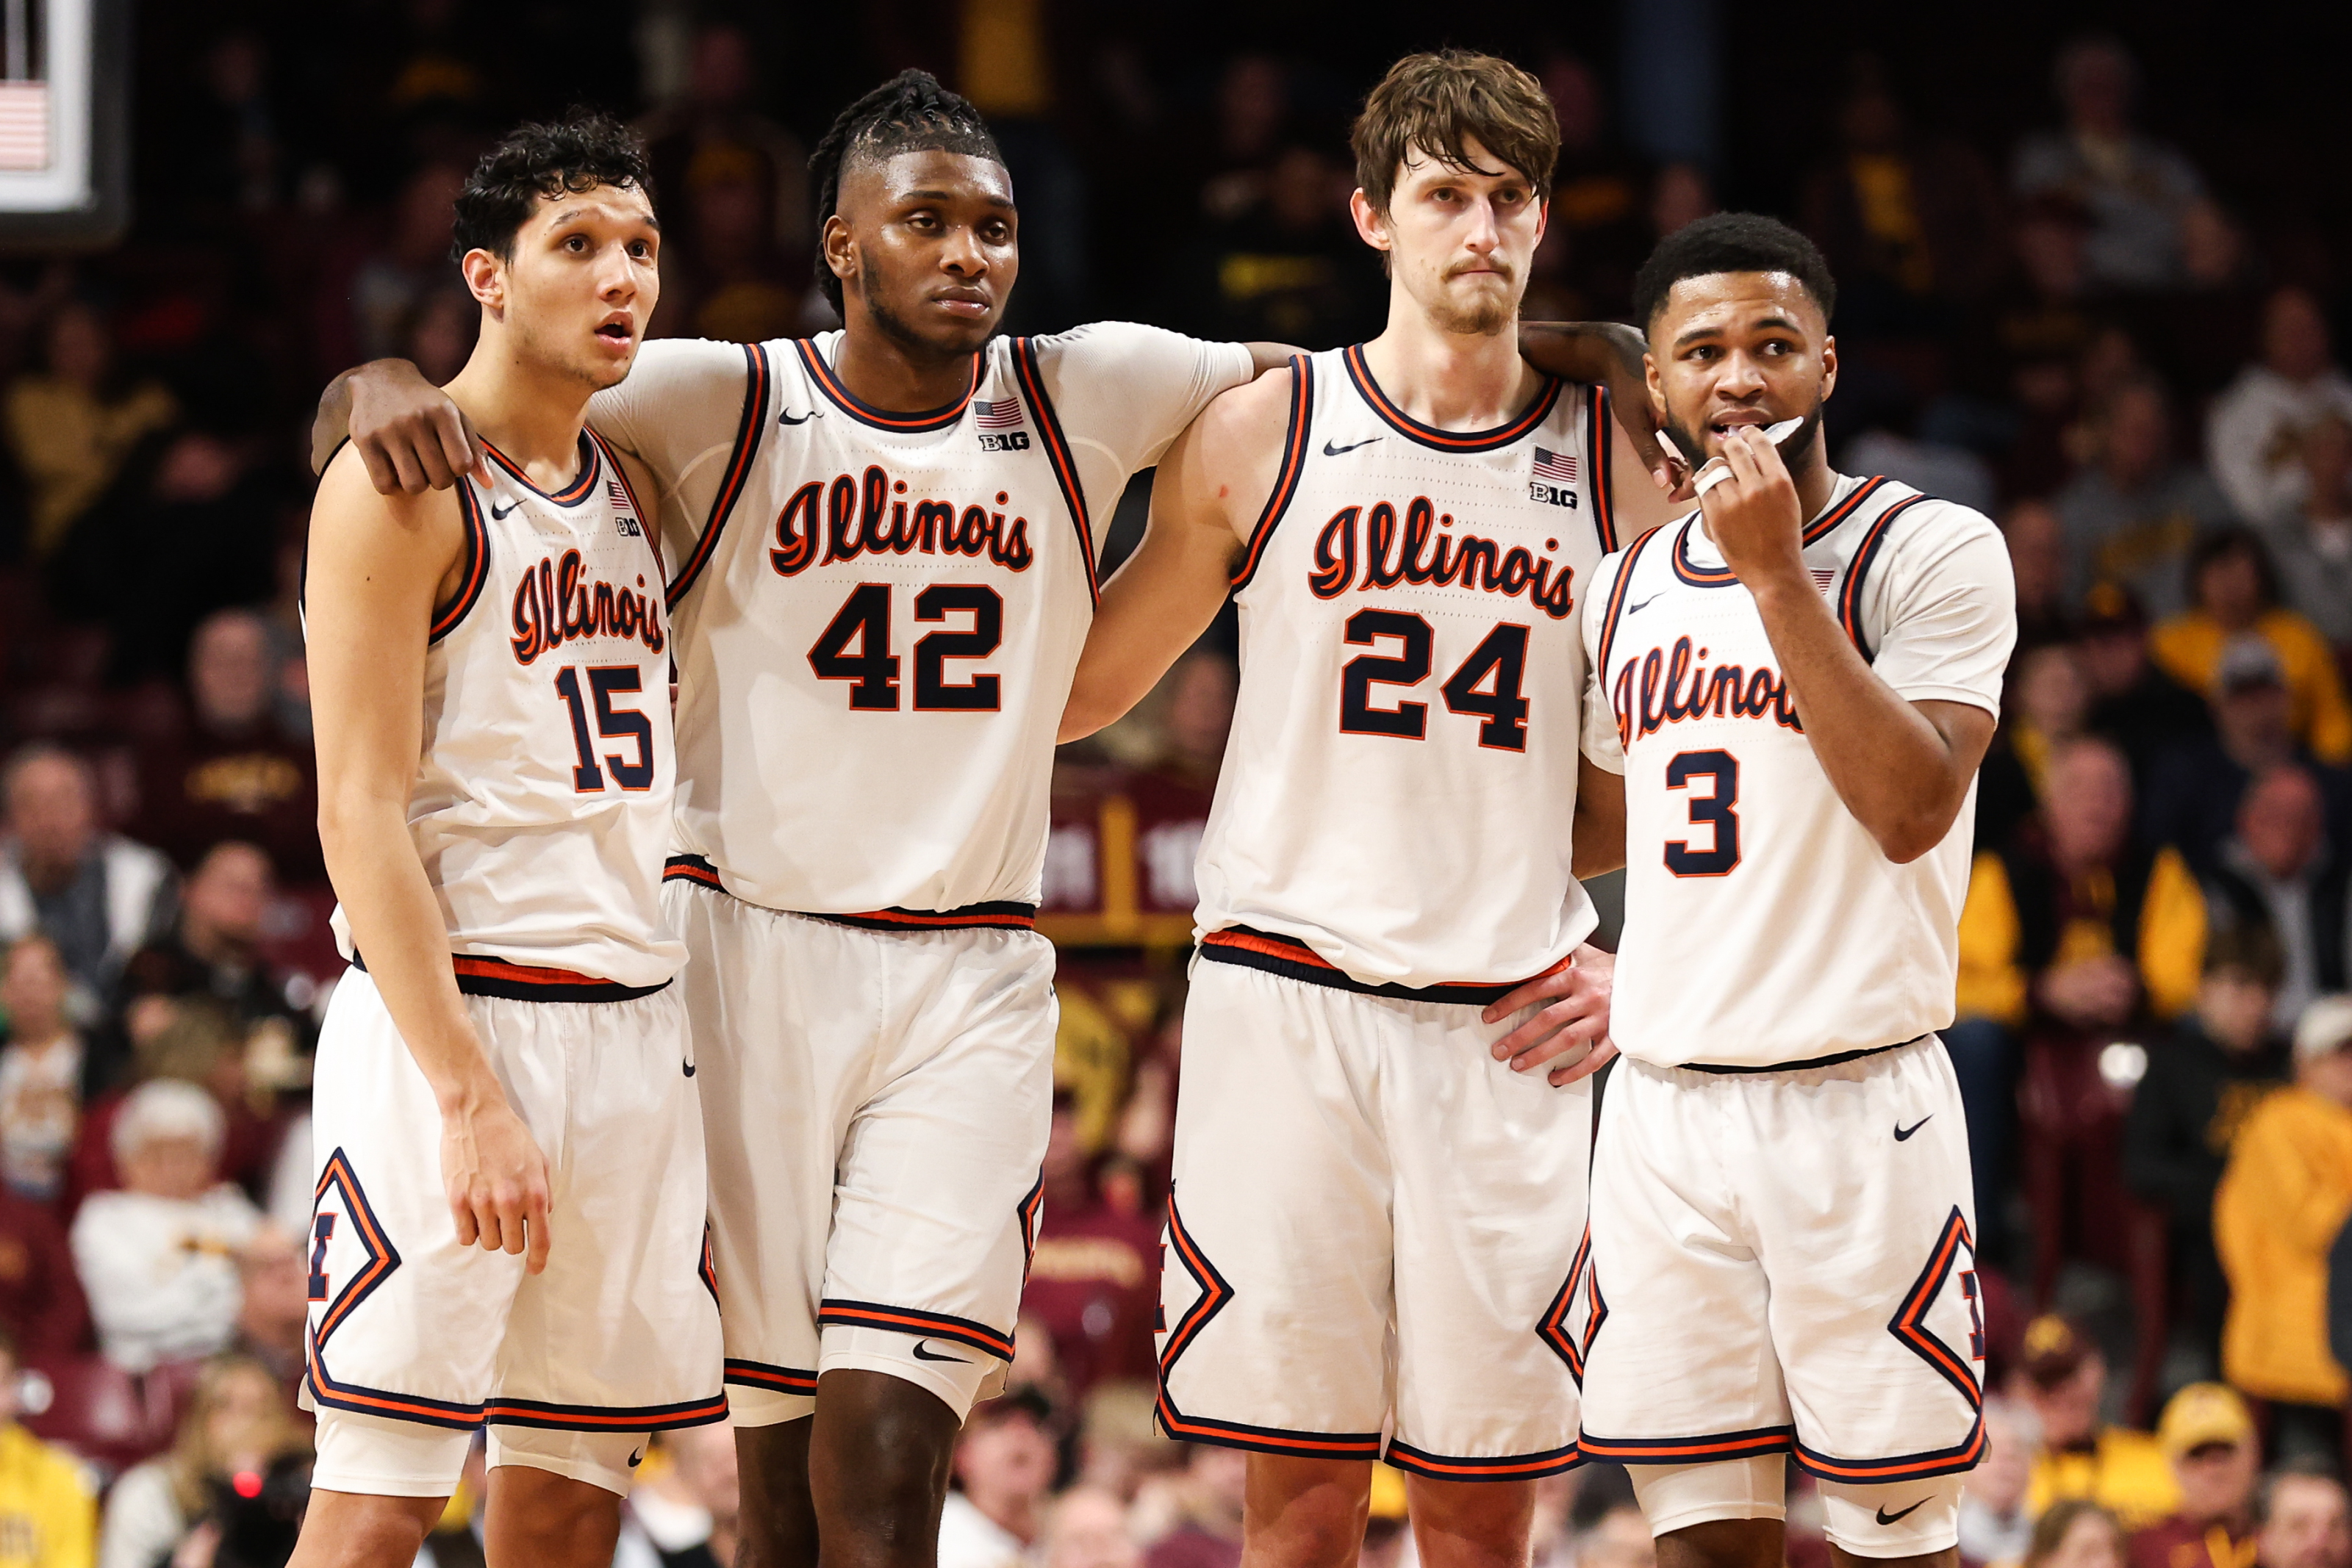 Illinois Basketball Minnesota game rescheduled, Illini to play 4 games in 9 days